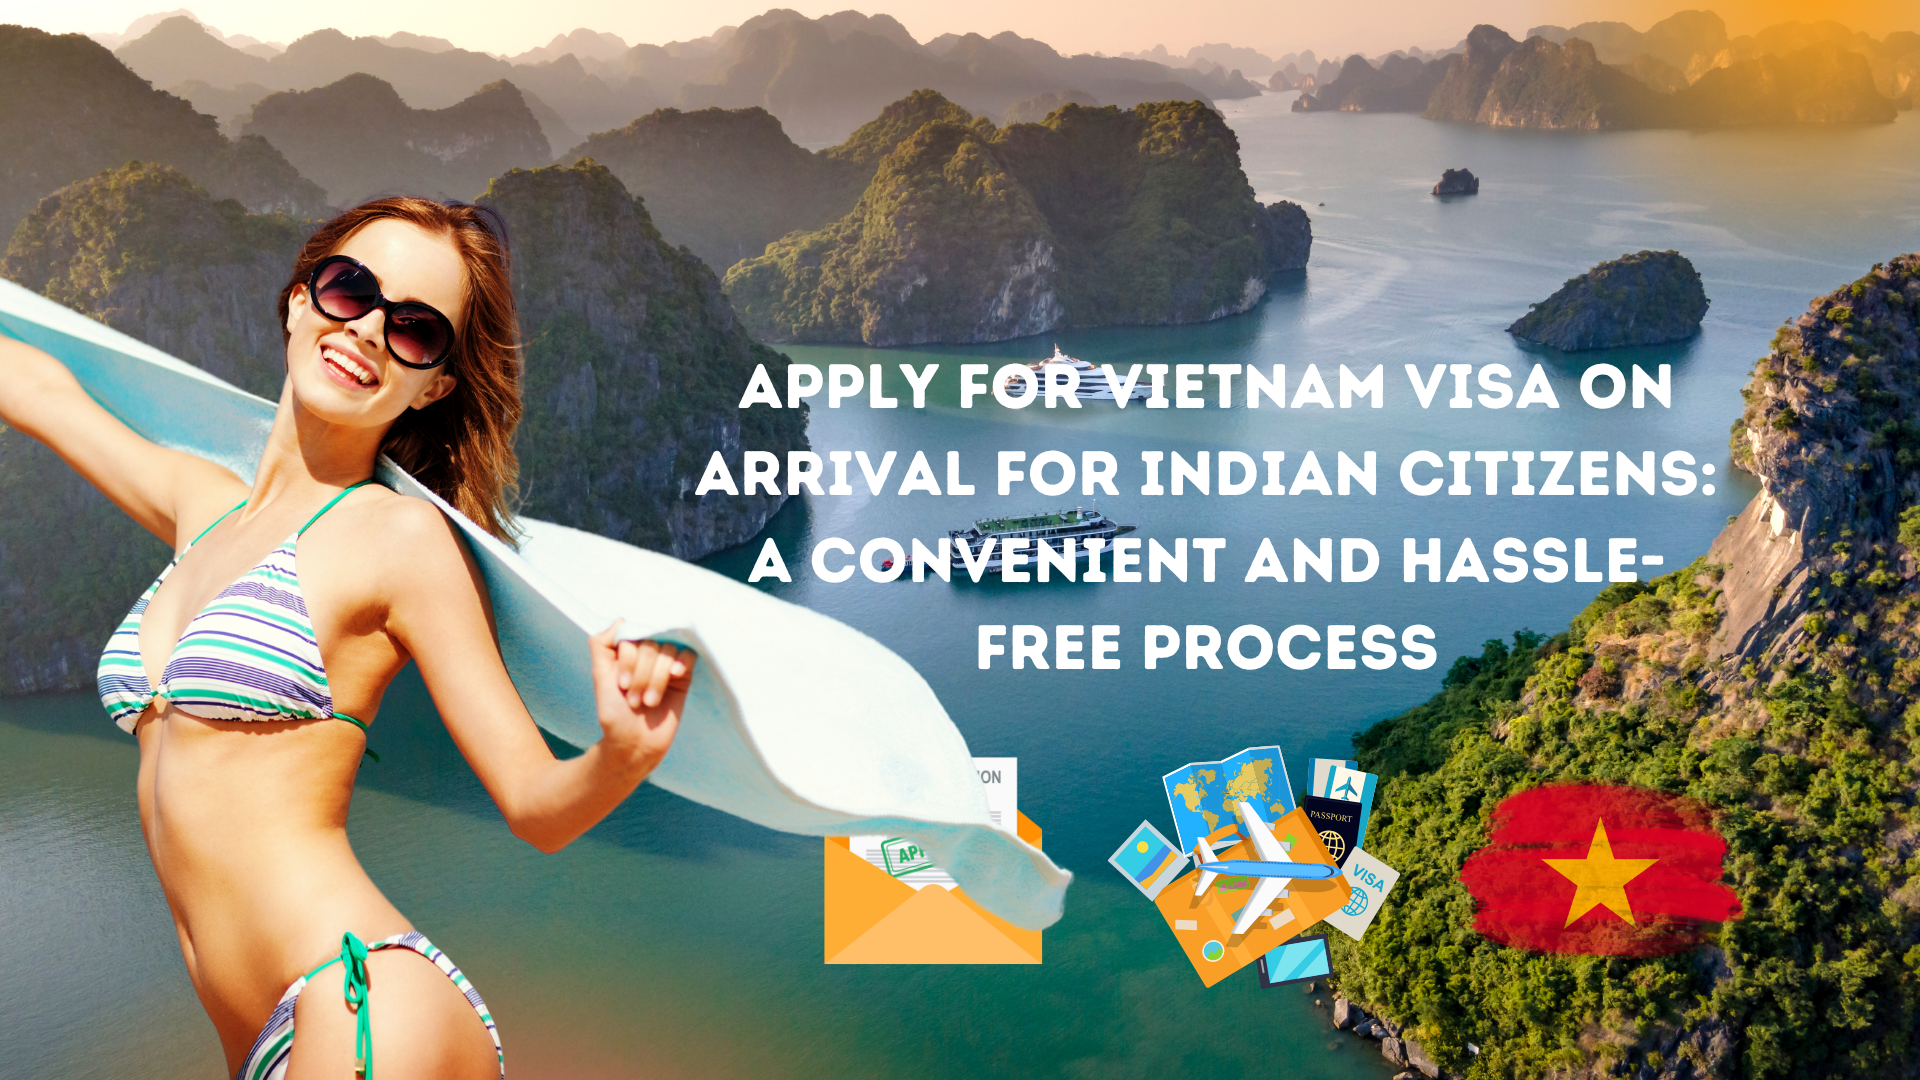 Eligibility for Vietnam Visa on Arrival for Indian Citizens